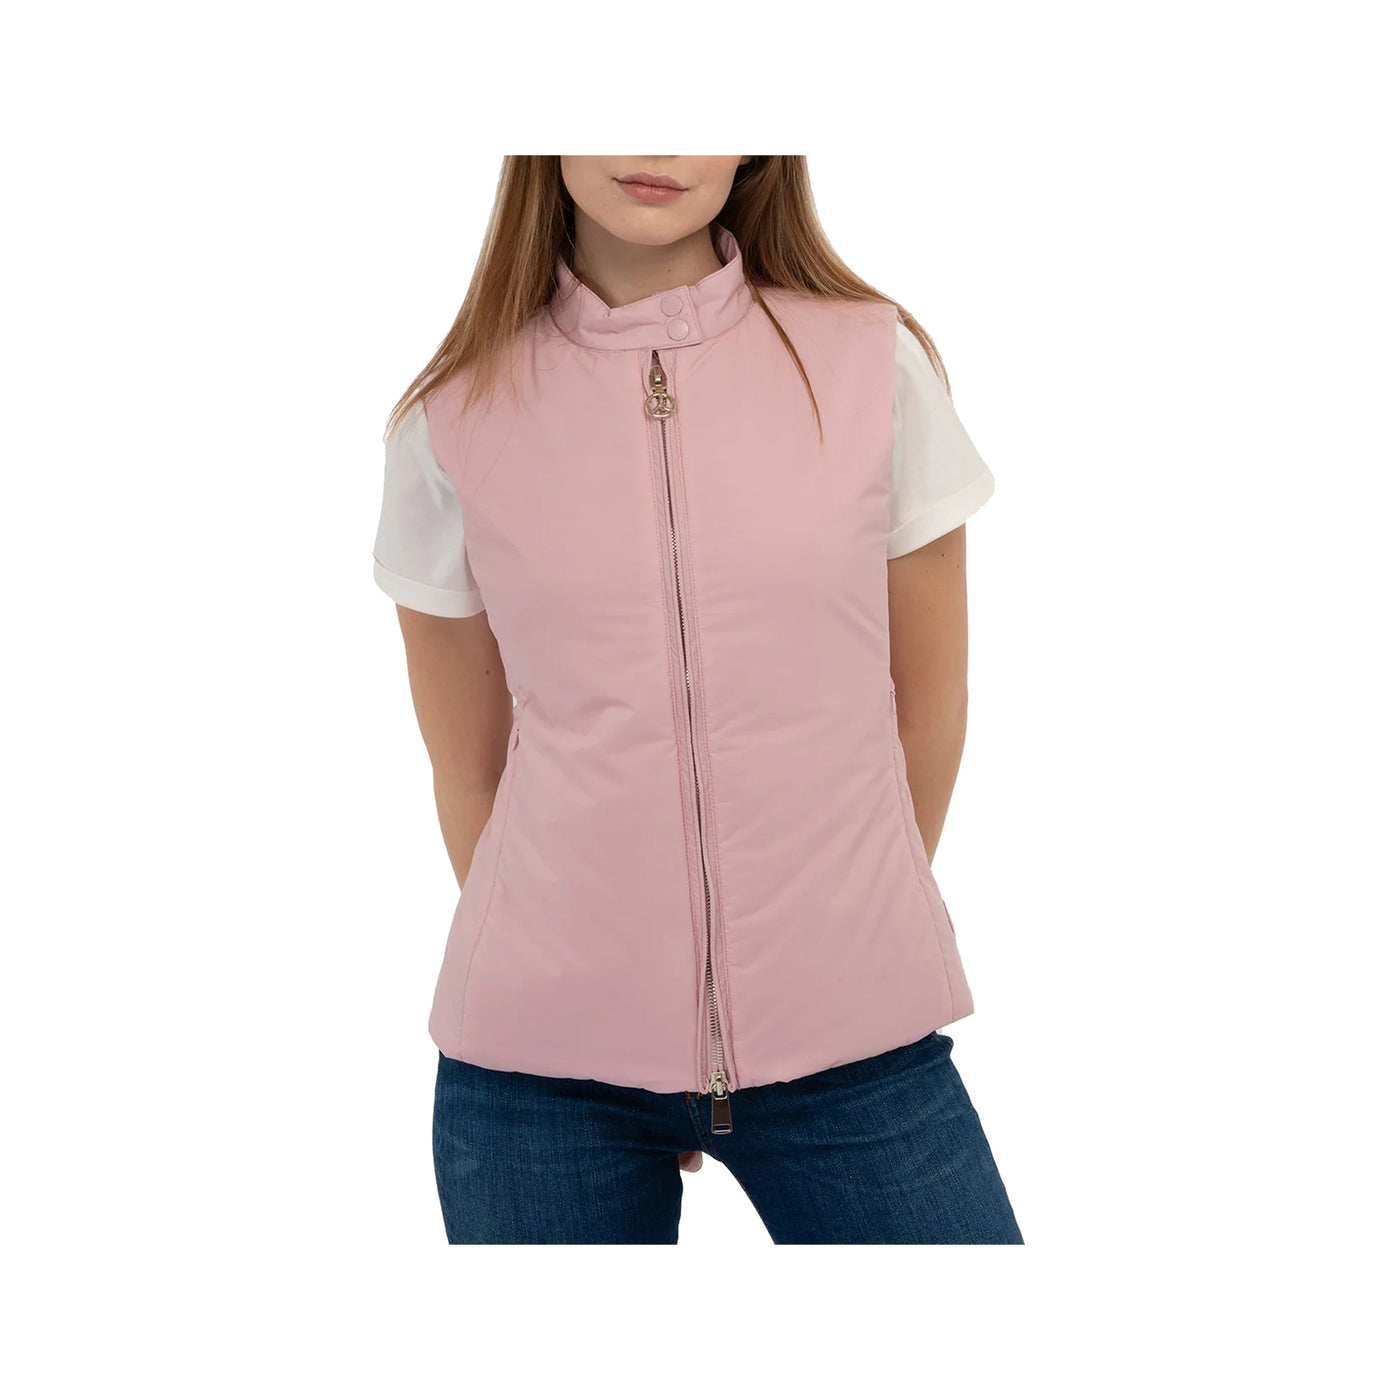 Women's waistcoat with collar with two buttons